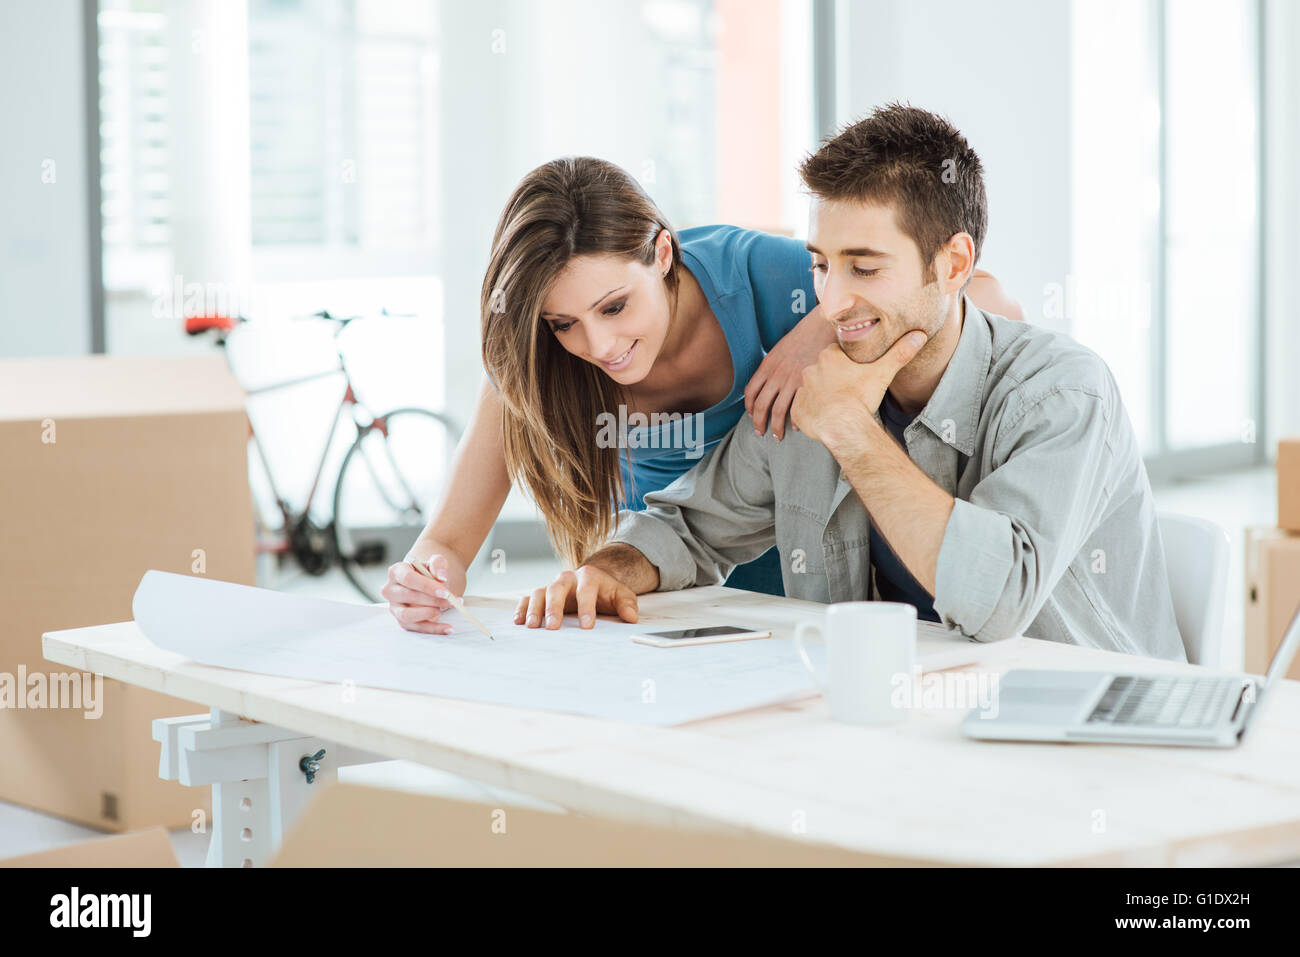 Yougn couple planning their new dream house, he is sitting at desk and she is drawing on a project, carton boxes on background Stock Photo